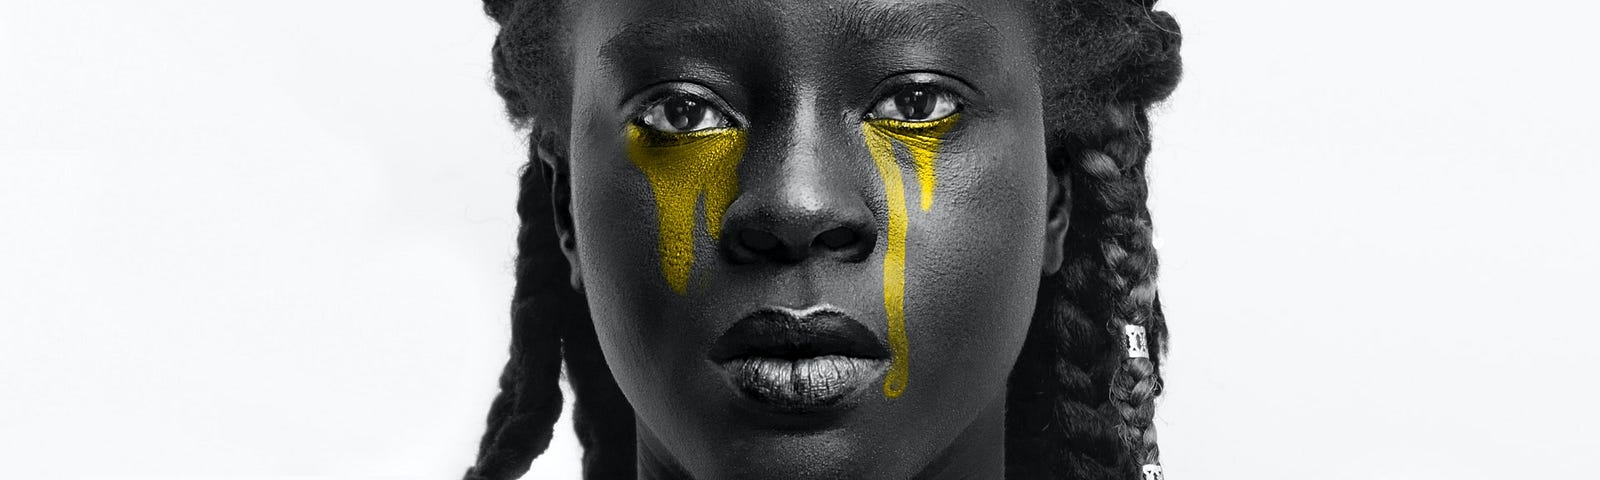 Greyscale portrait of a young Black woman with braids and tears of gold streaming down her face